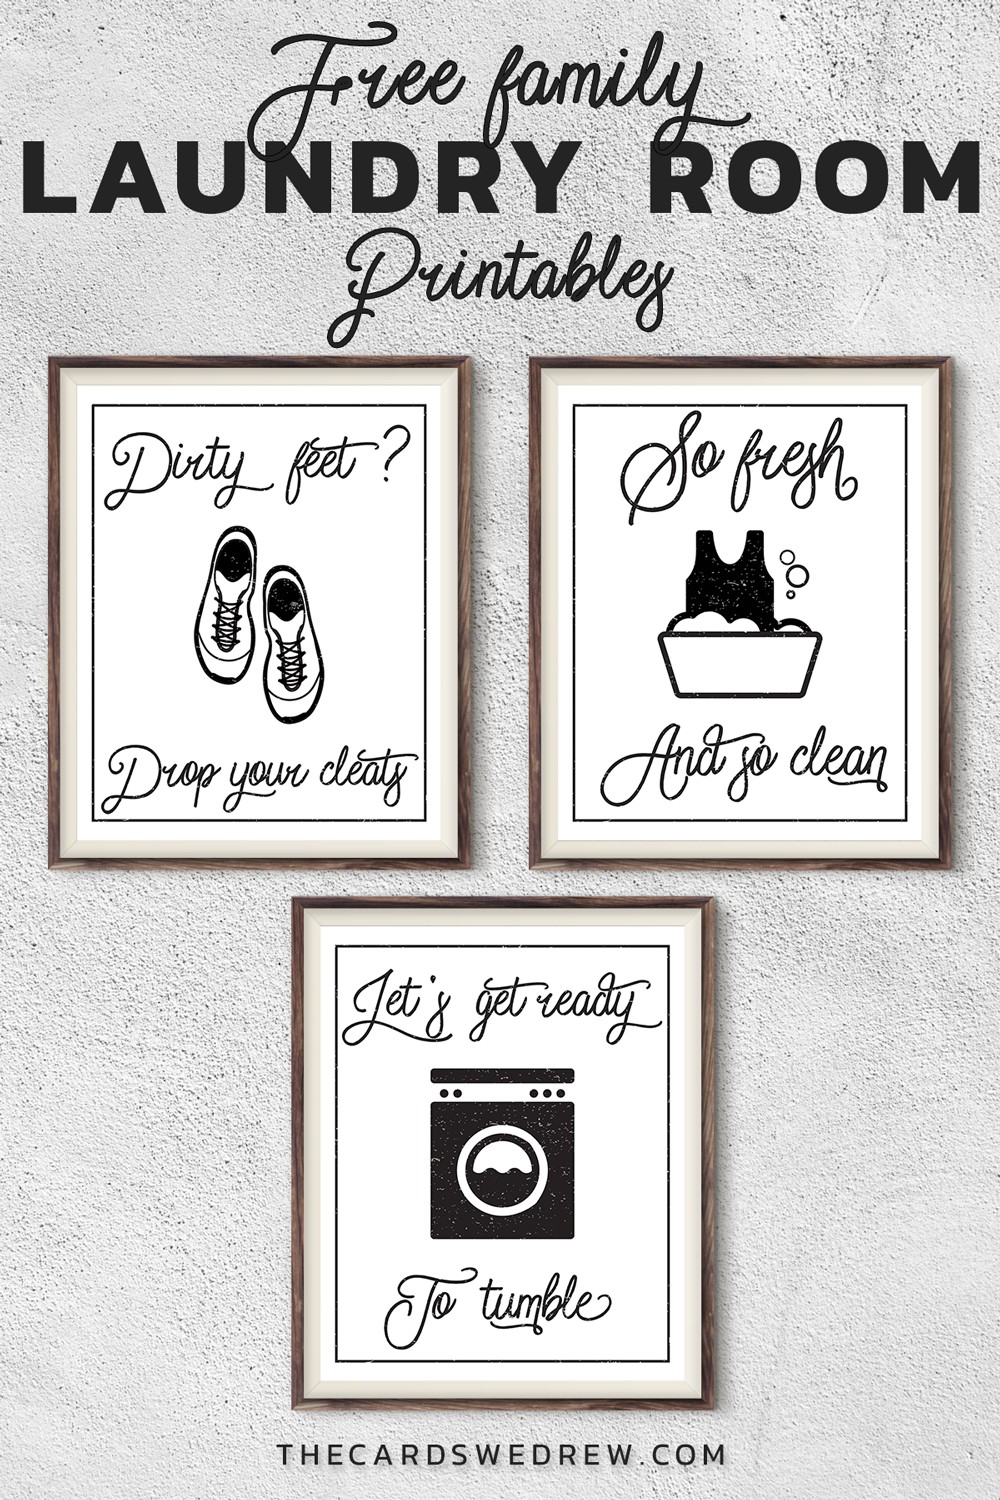 Free Farmhouse Laundry Room Printables for Moms The Cards We Drew